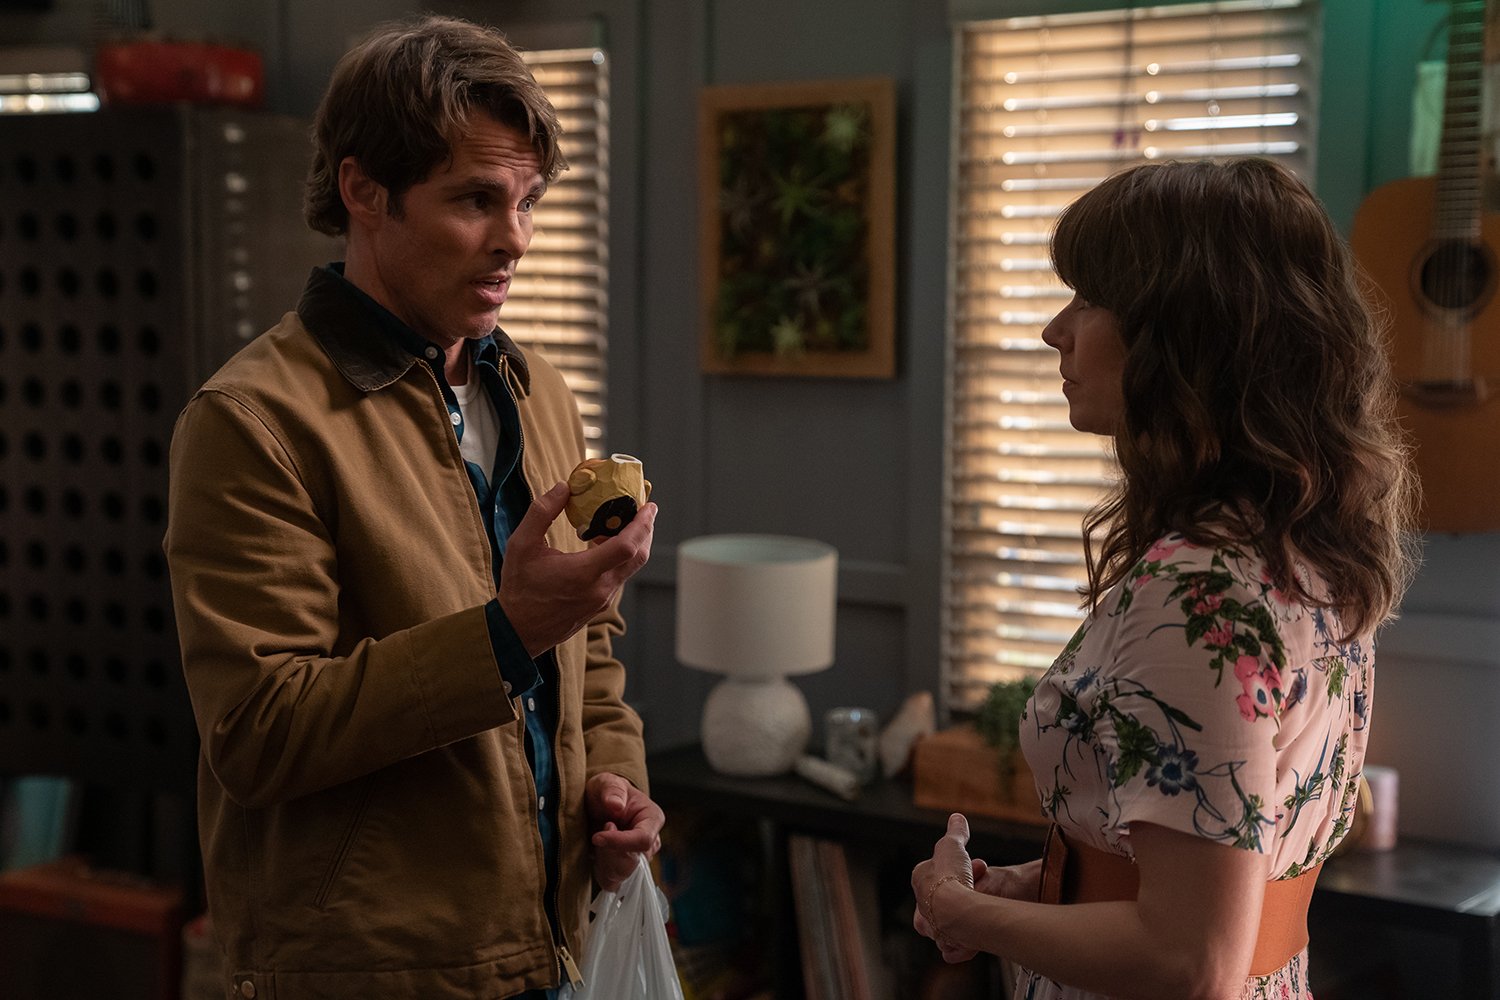 Dead to Me Season 3: James Marsden's Ben Wood holds a wooden bird while talking to Linda Cardellini's Judy Hale